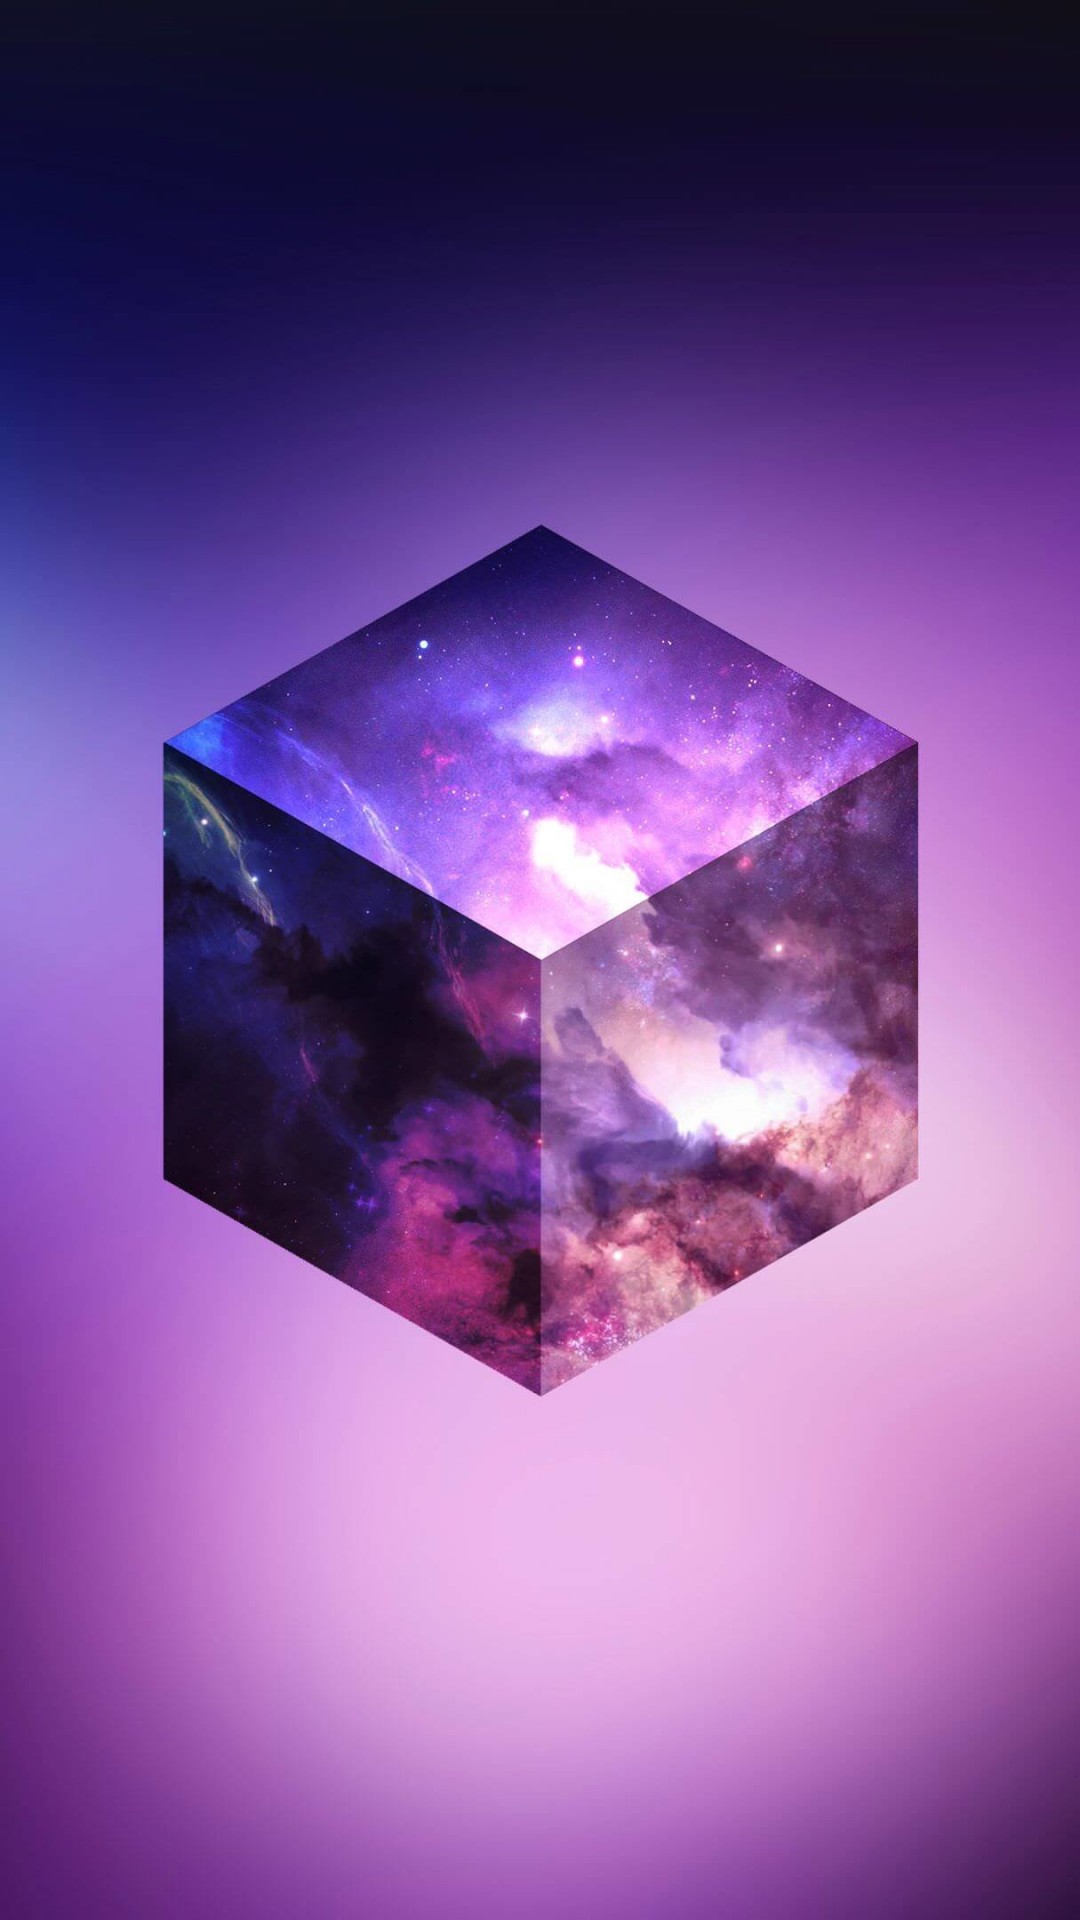 Cosmic Cube Wallpaper for SAMSUNG Galaxy Note 3